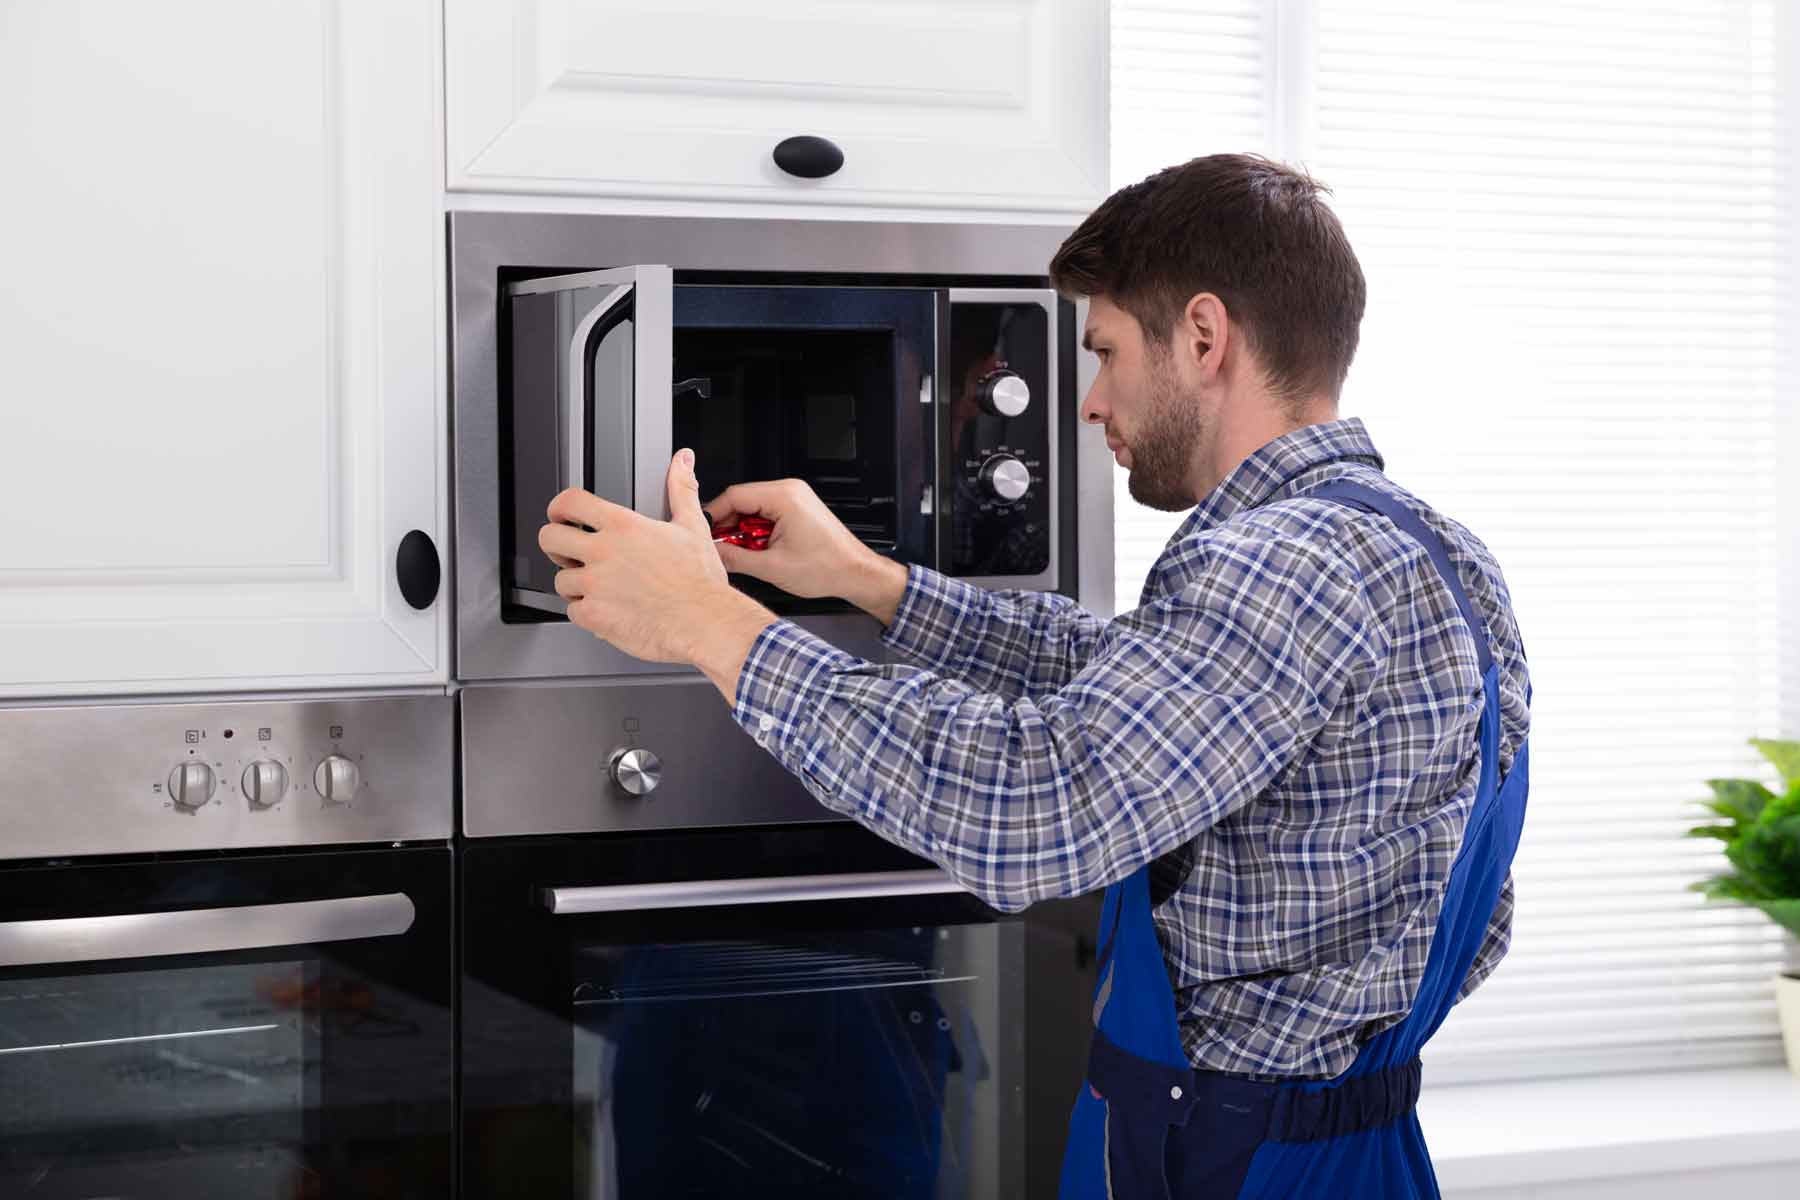 Microwave Repair Guide: Common Issues and Fixes